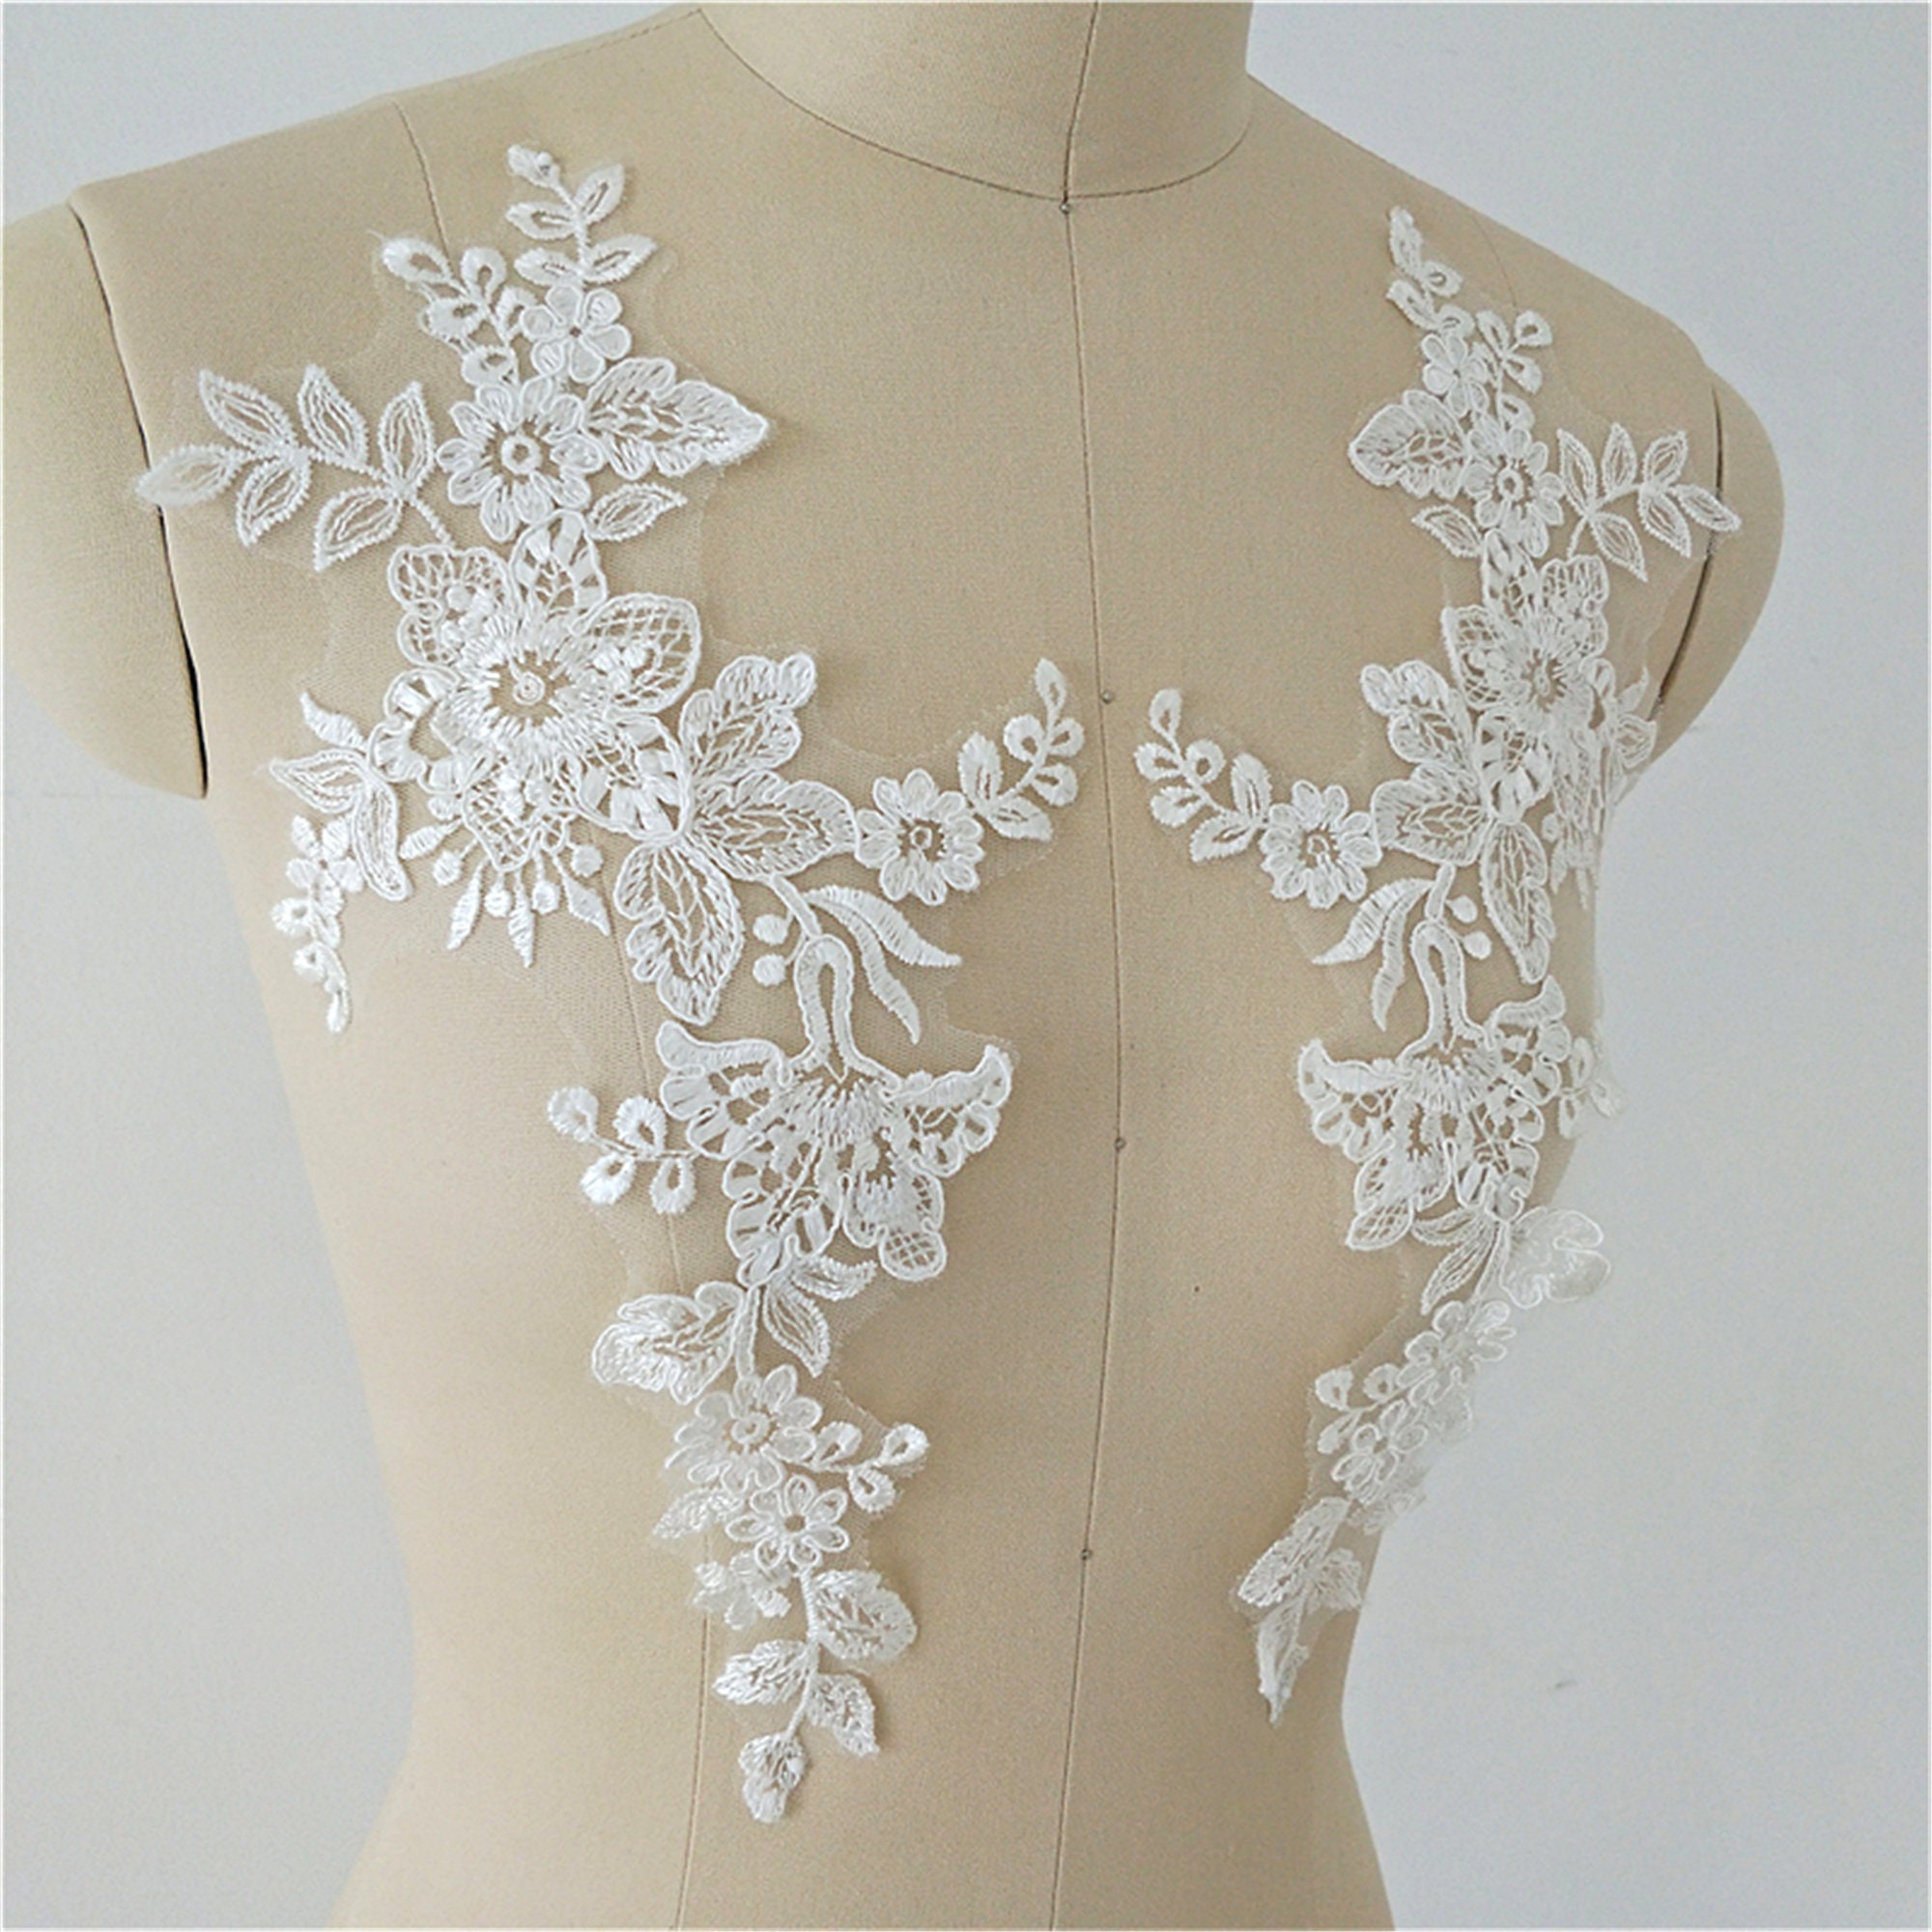 Embroidery Corded Lace Applique Motif Patch Materials with Corded Sewing on Bridal Wedding Full Dress Gown Trims Veils Fabric Crafts 1 Pair